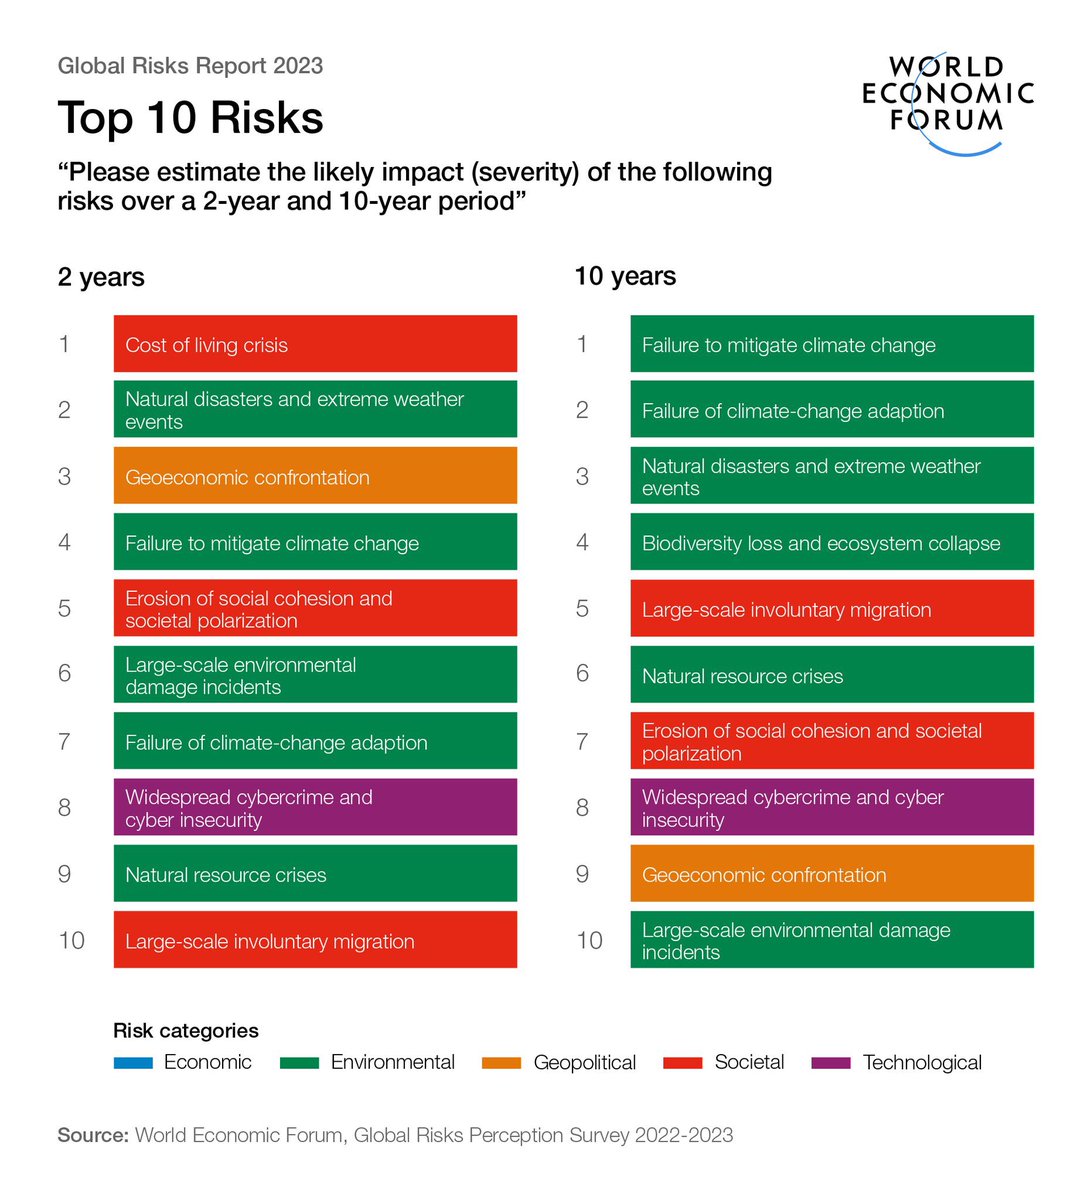 Always interesting to see #WEF23 annual risk analysis report; cost of living concerns dominates in short-term but are dwarfed in medium-term by potential impacts from #climate & #biodiversity crises